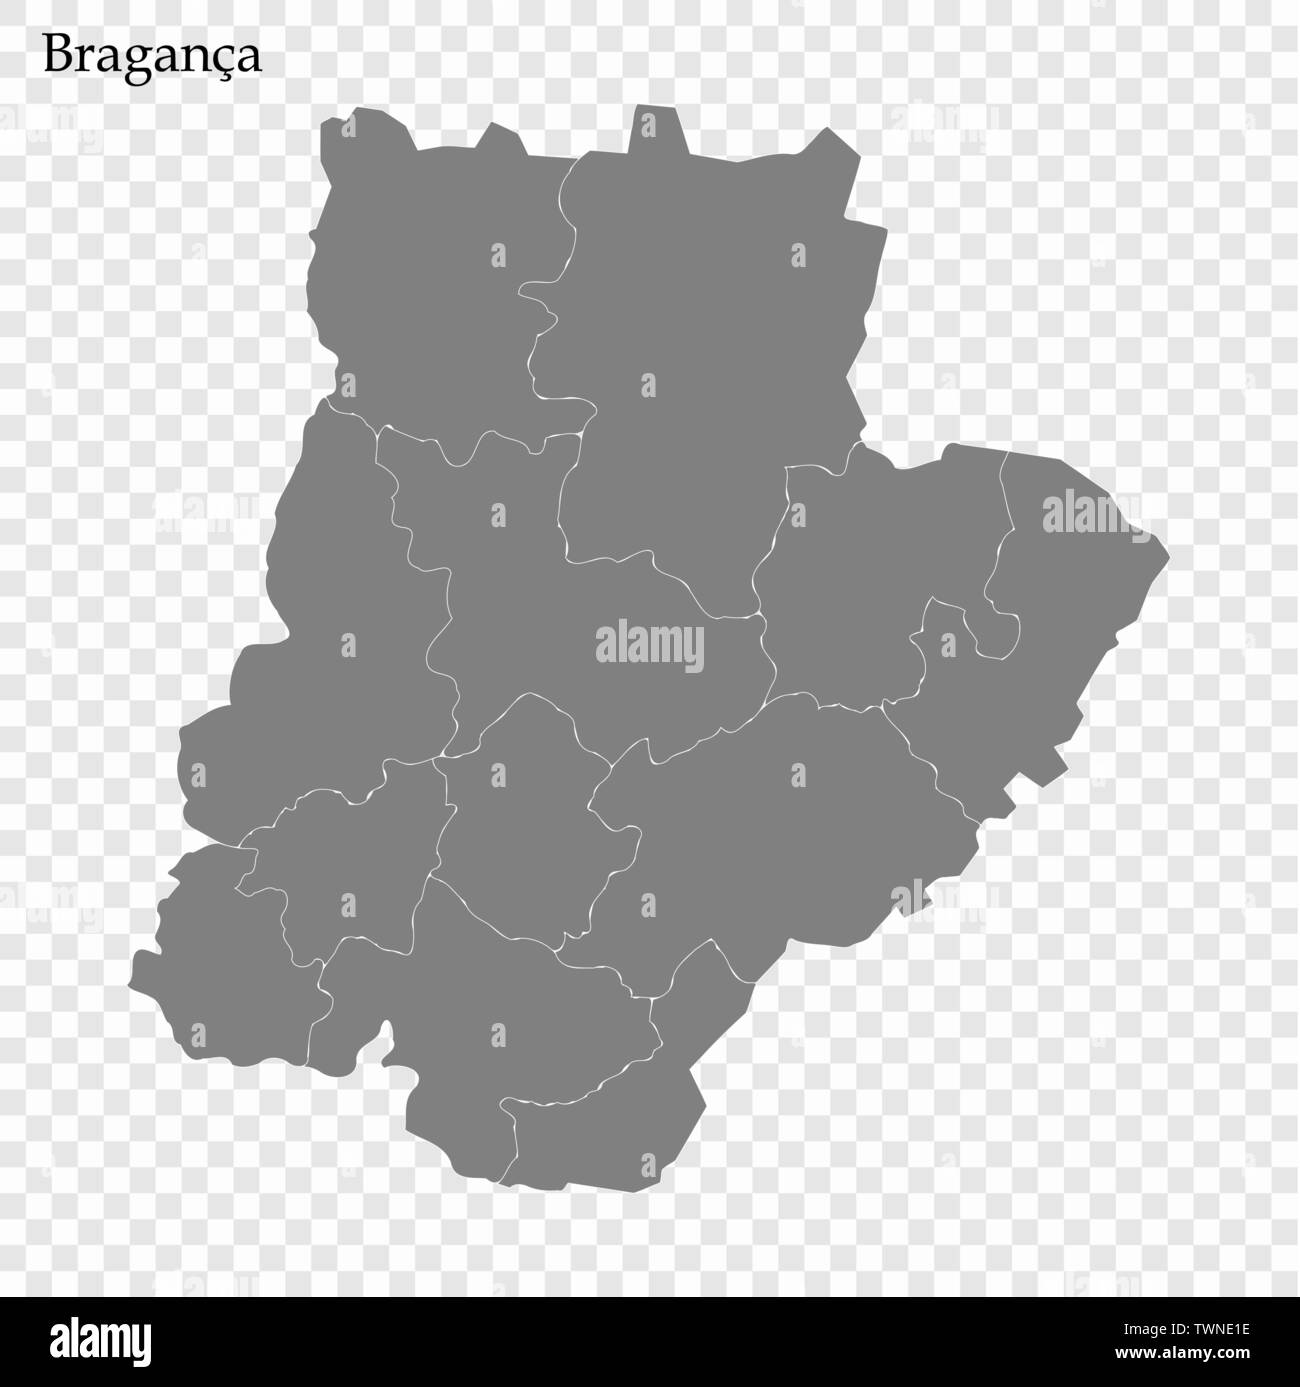 High Quality map of Braganca is a Region of Portugal, with borders of districts Stock Vector